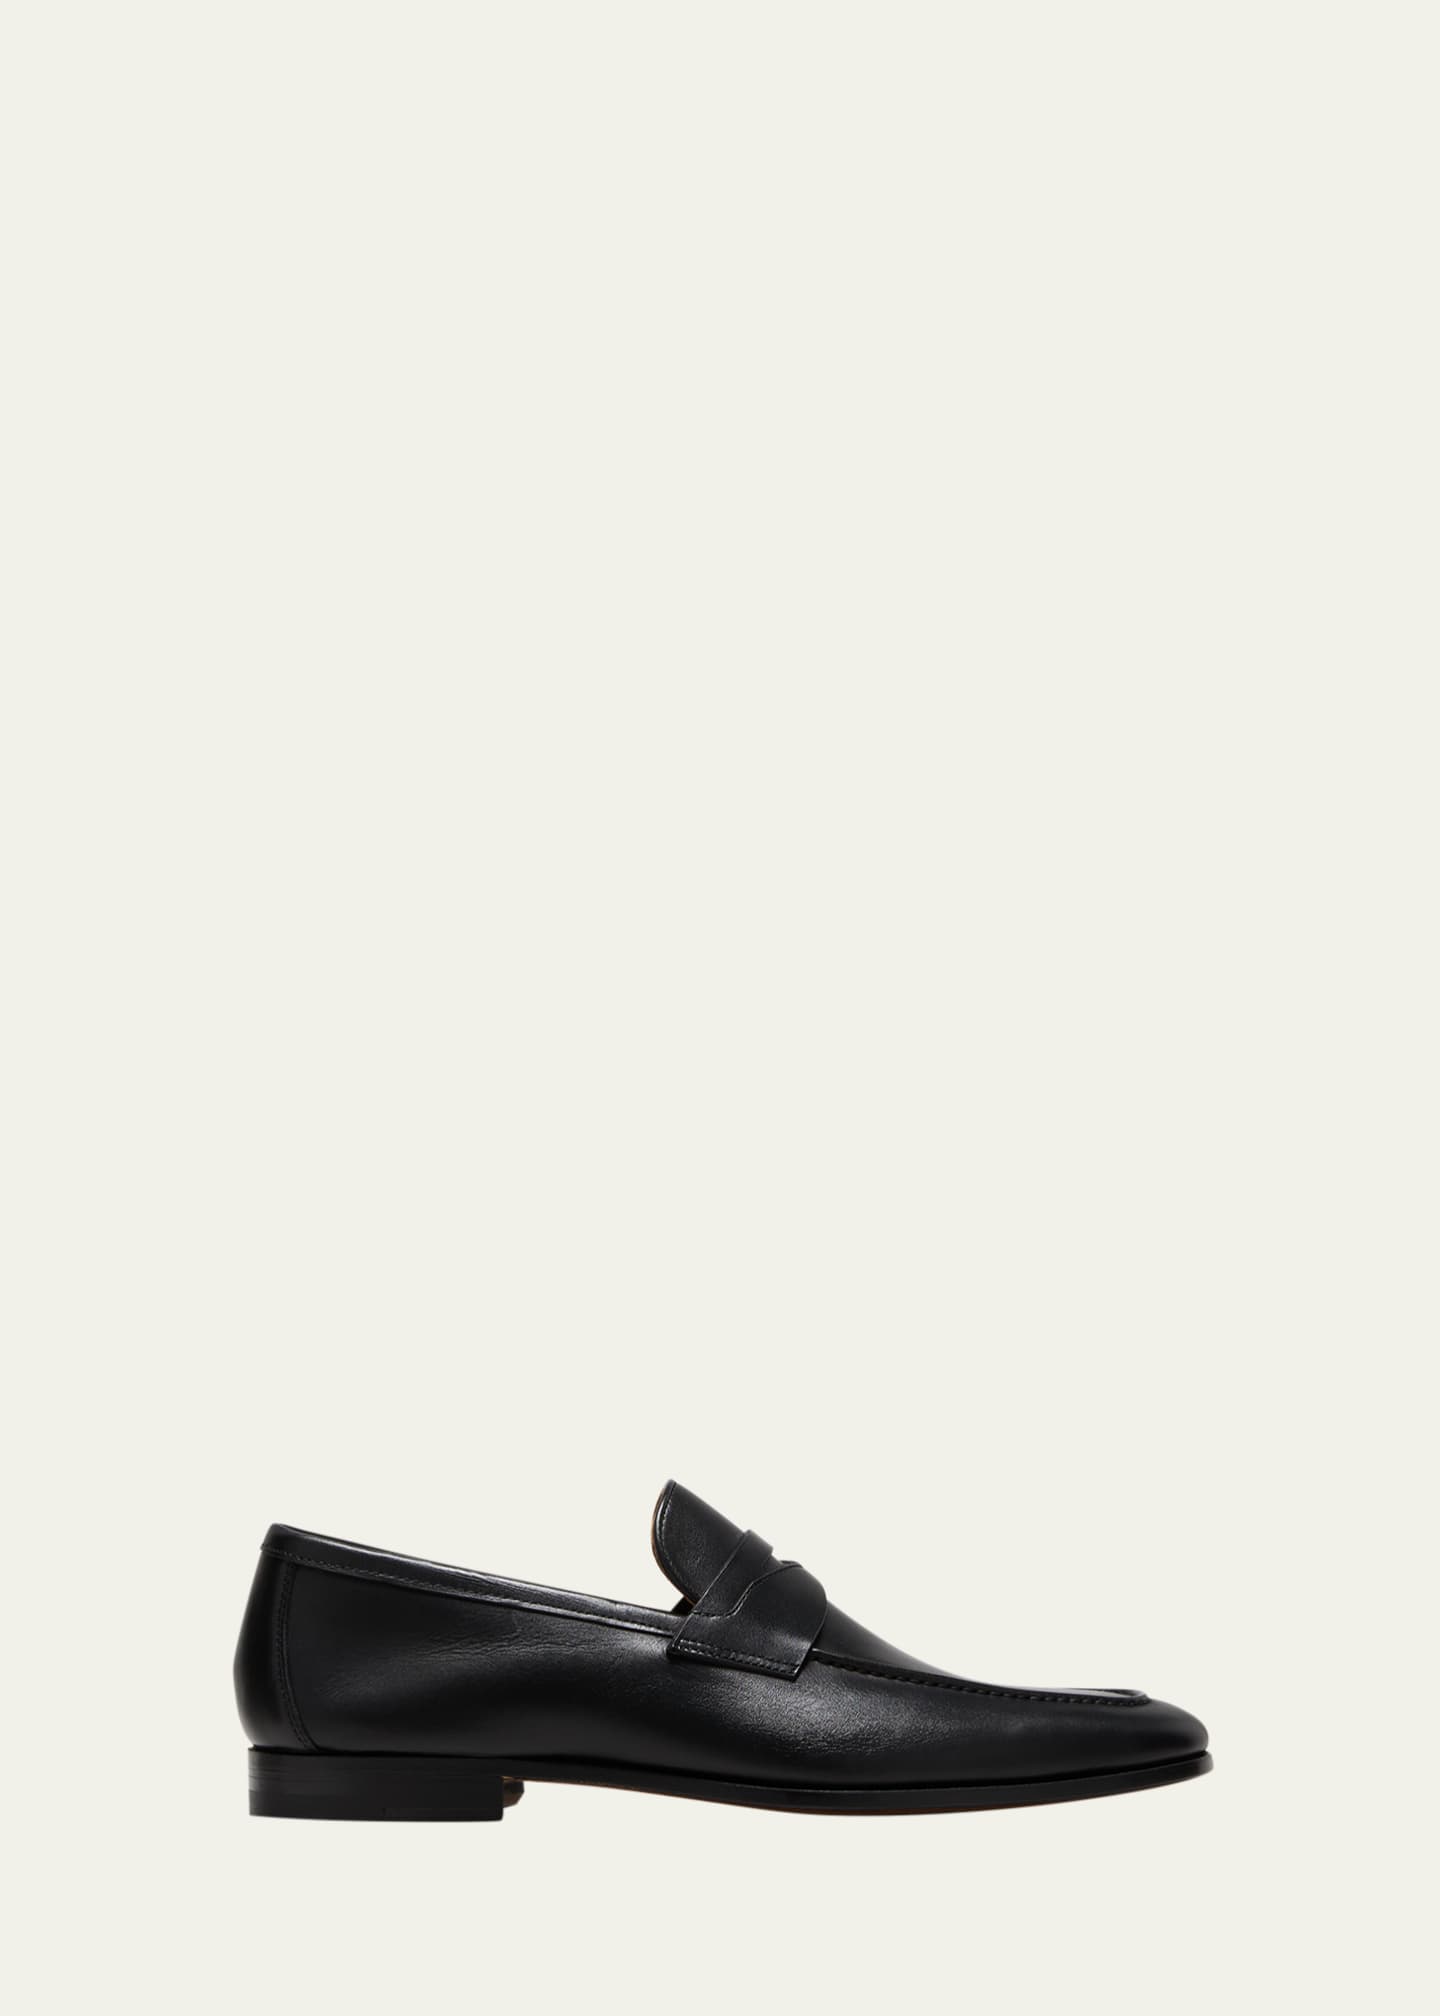 Magnanni Men's Sasso Leather Penny Loafers - Bergdorf Goodman